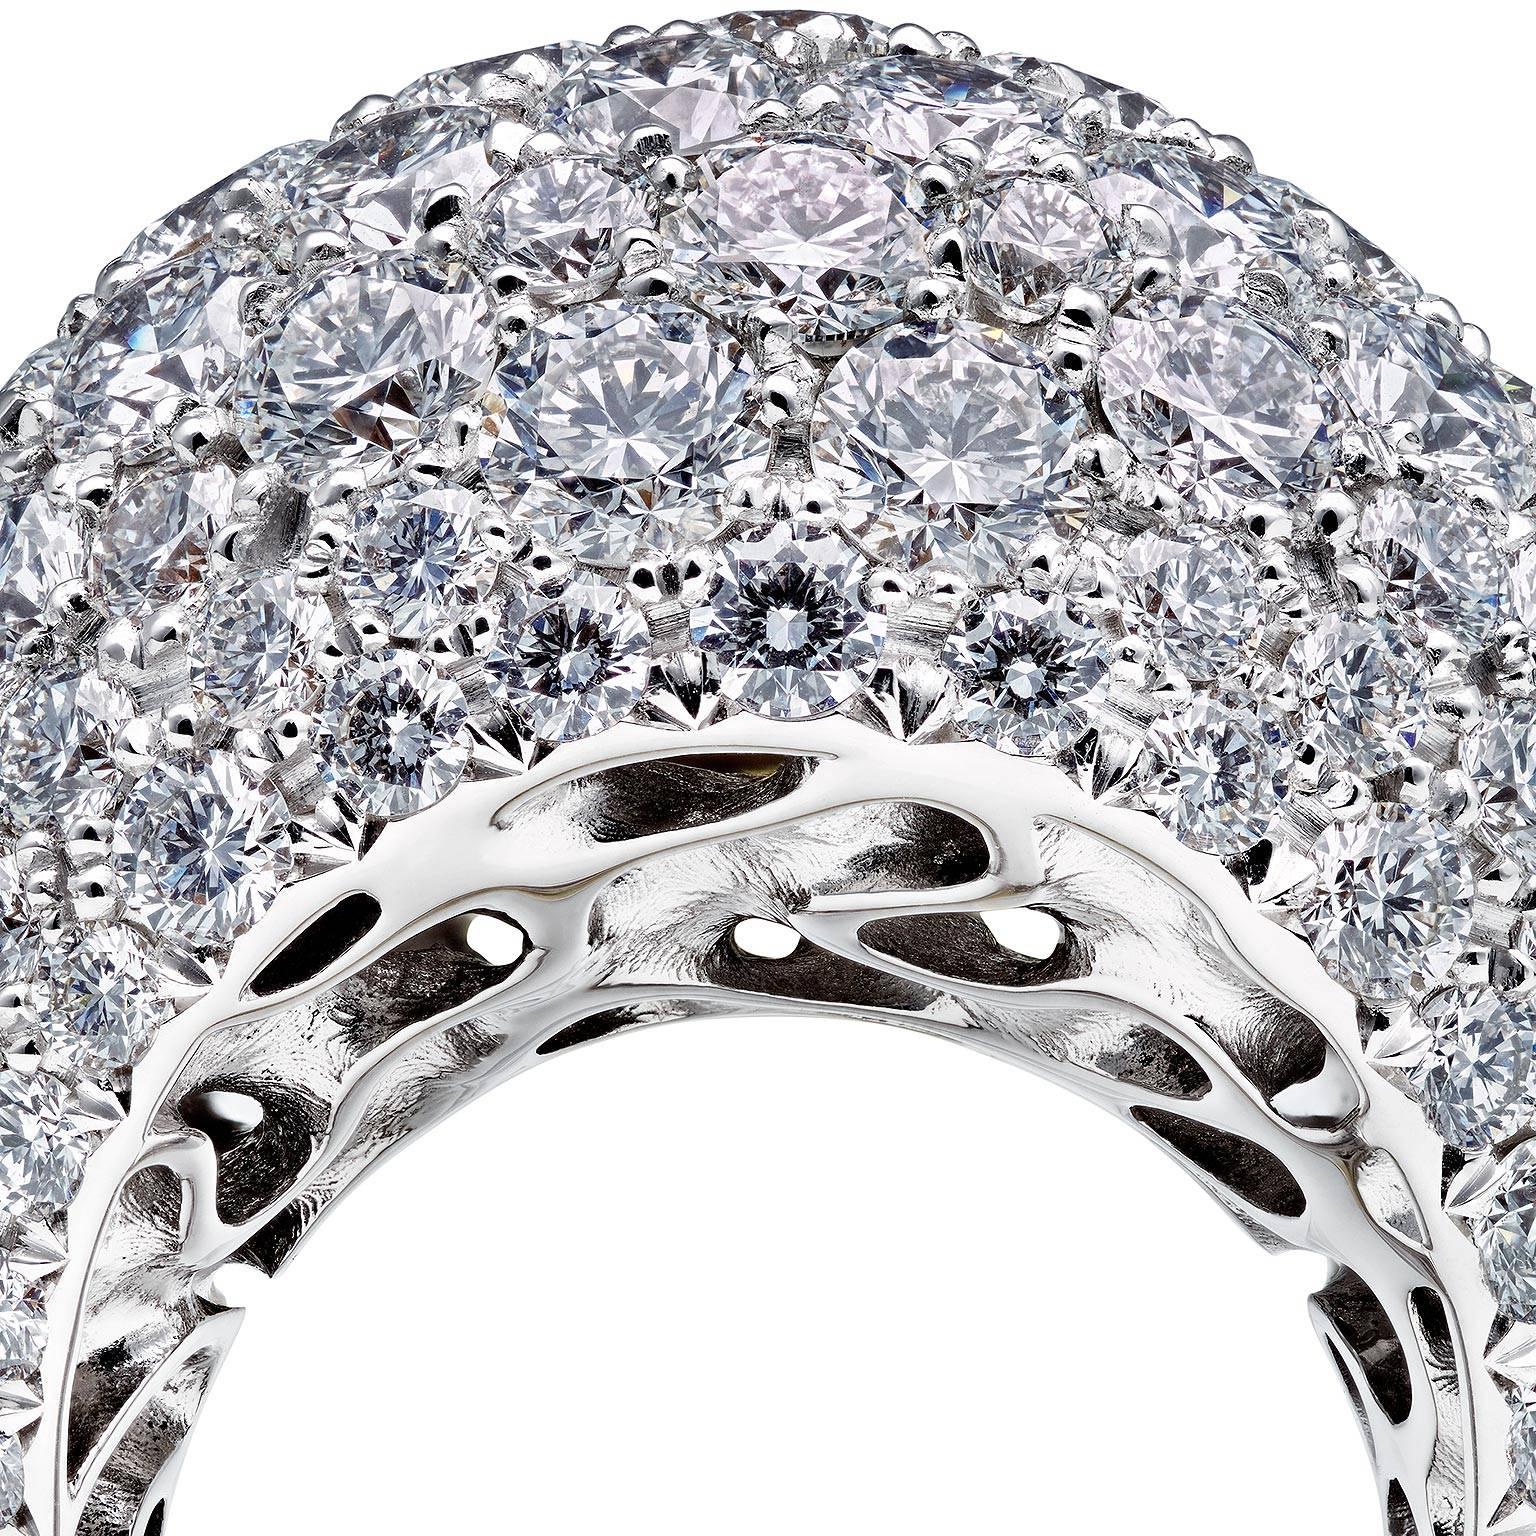 This voluminous dome right hand, or cocktail, 18 Karat white gold and diamond ring designed by Towe Norlen in 2015, has 176 hand set Top Wesselton (TW vvs) high quality diamonds. In total 15.6 Carats. Its highest point from the dome to the finger,